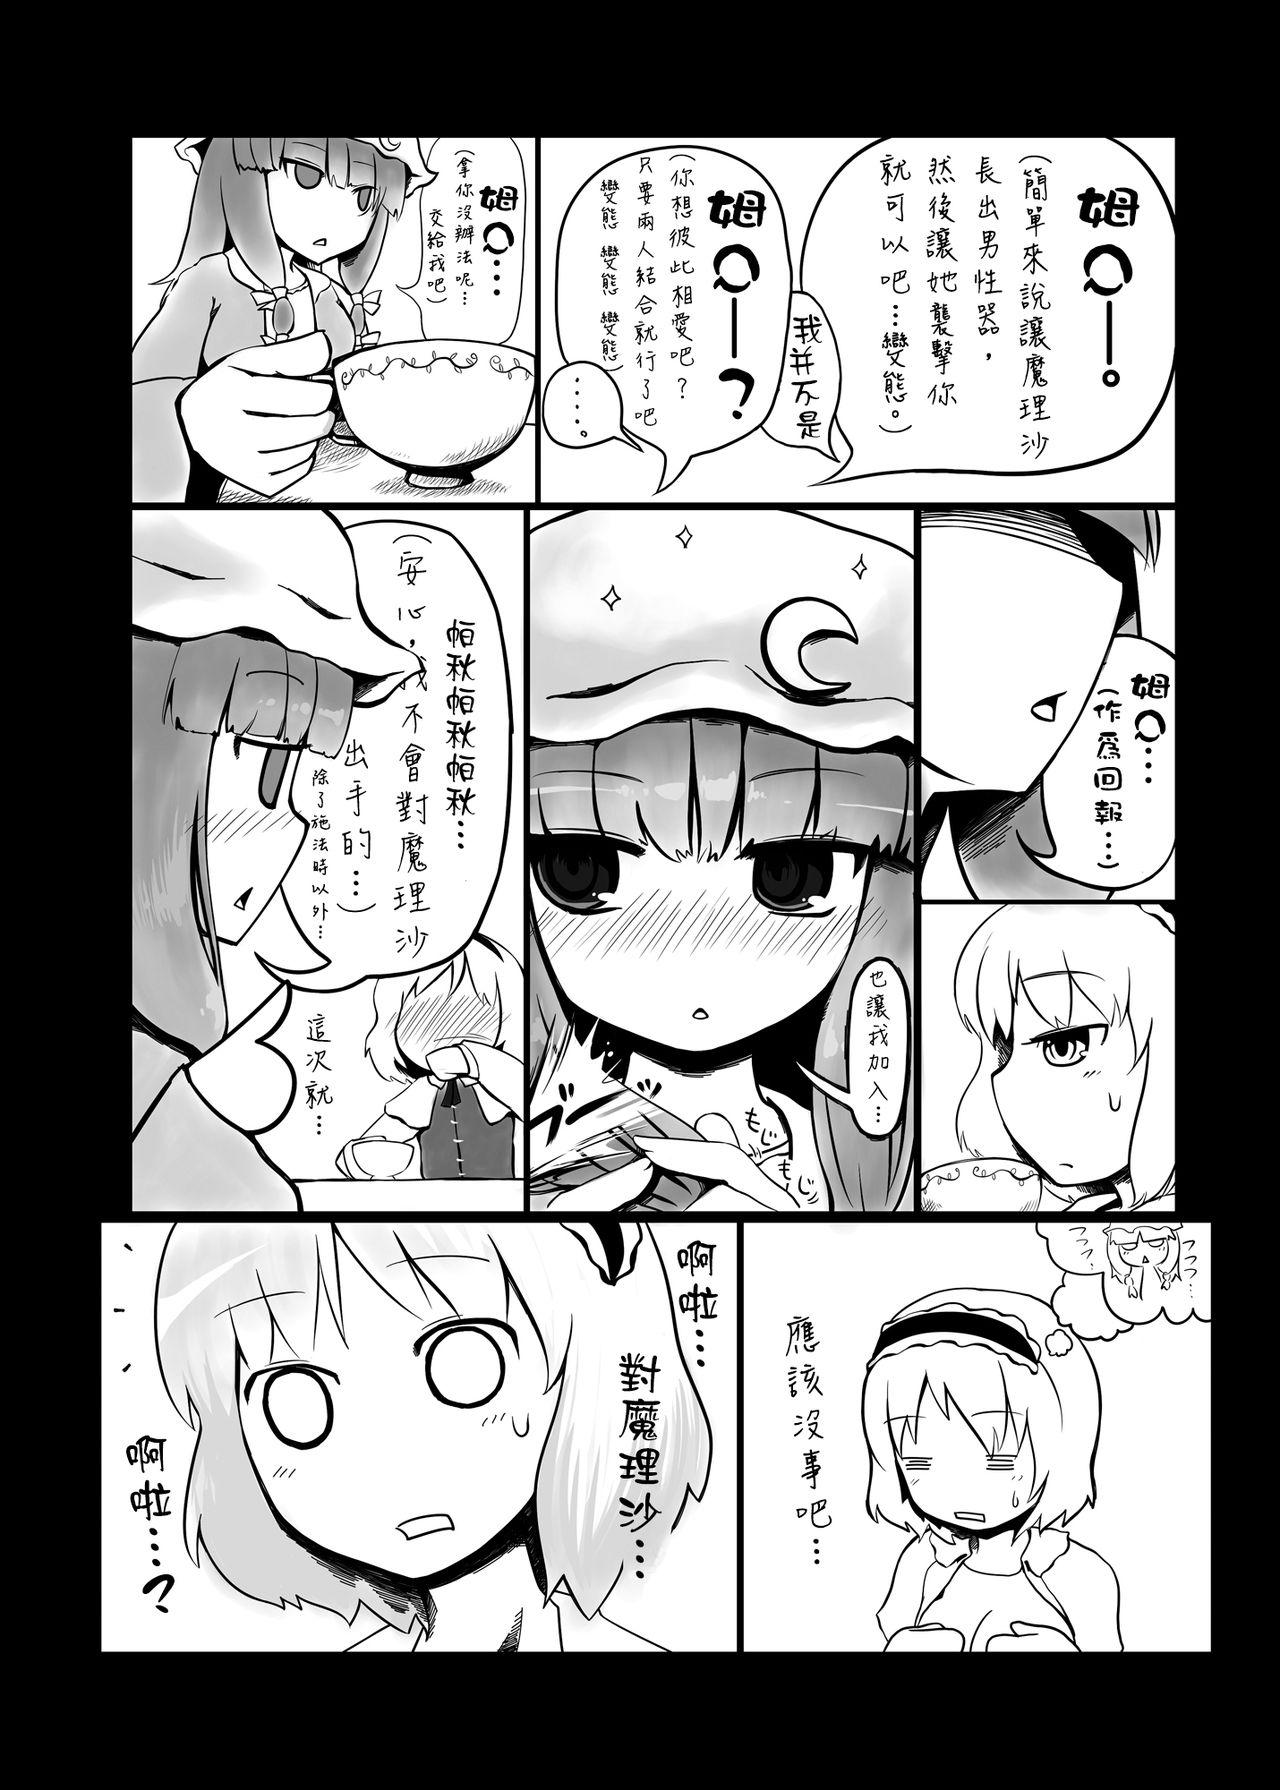 Best Blowjobs Ever Touhou Ero Atsume. - Touhou project Best Blow Jobs Ever - Page 10